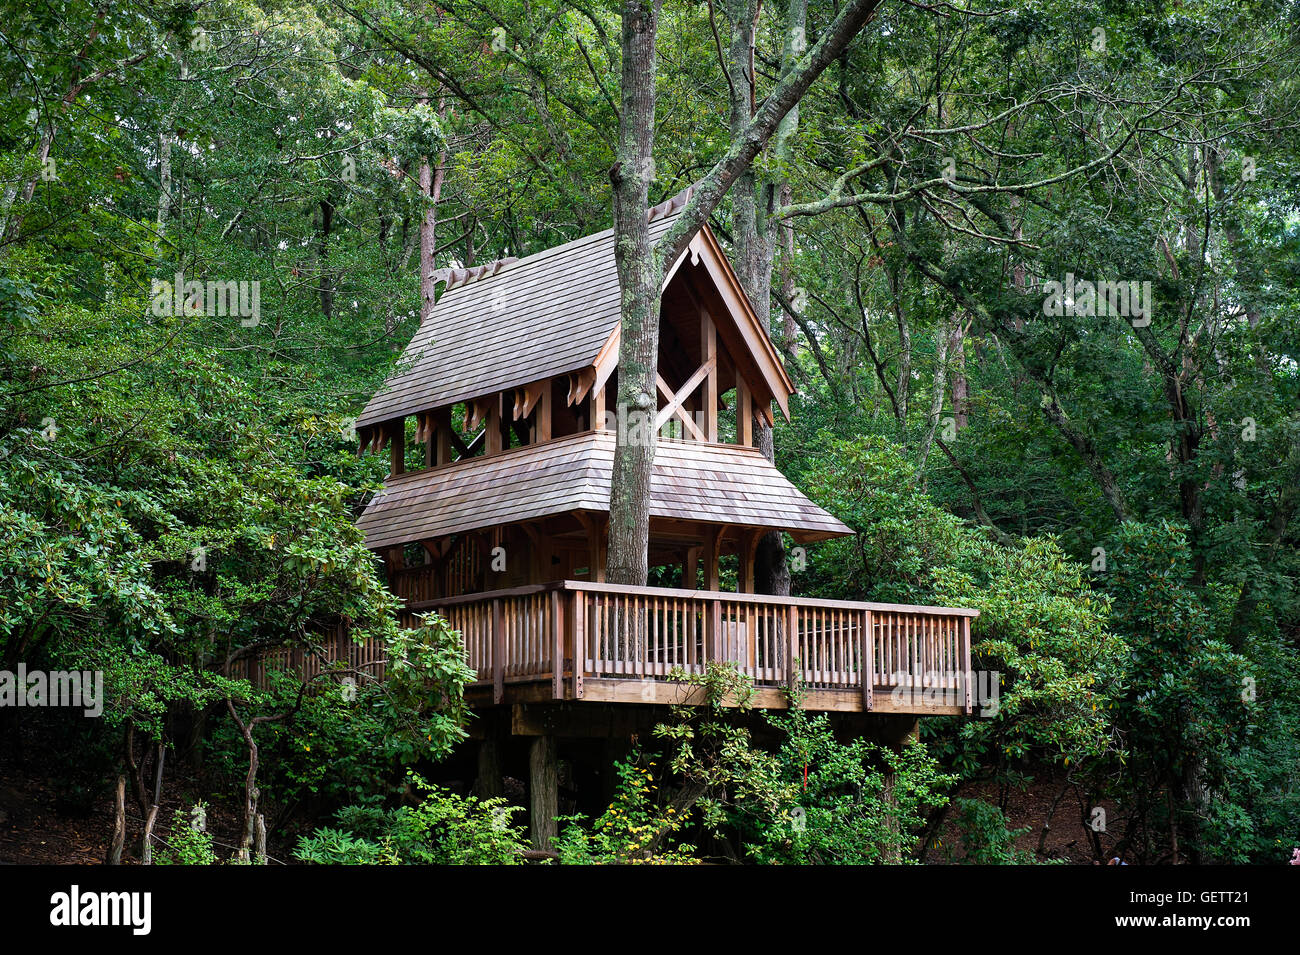 Tree House At Heritage Museums And Gardens Stock Photo 112413113